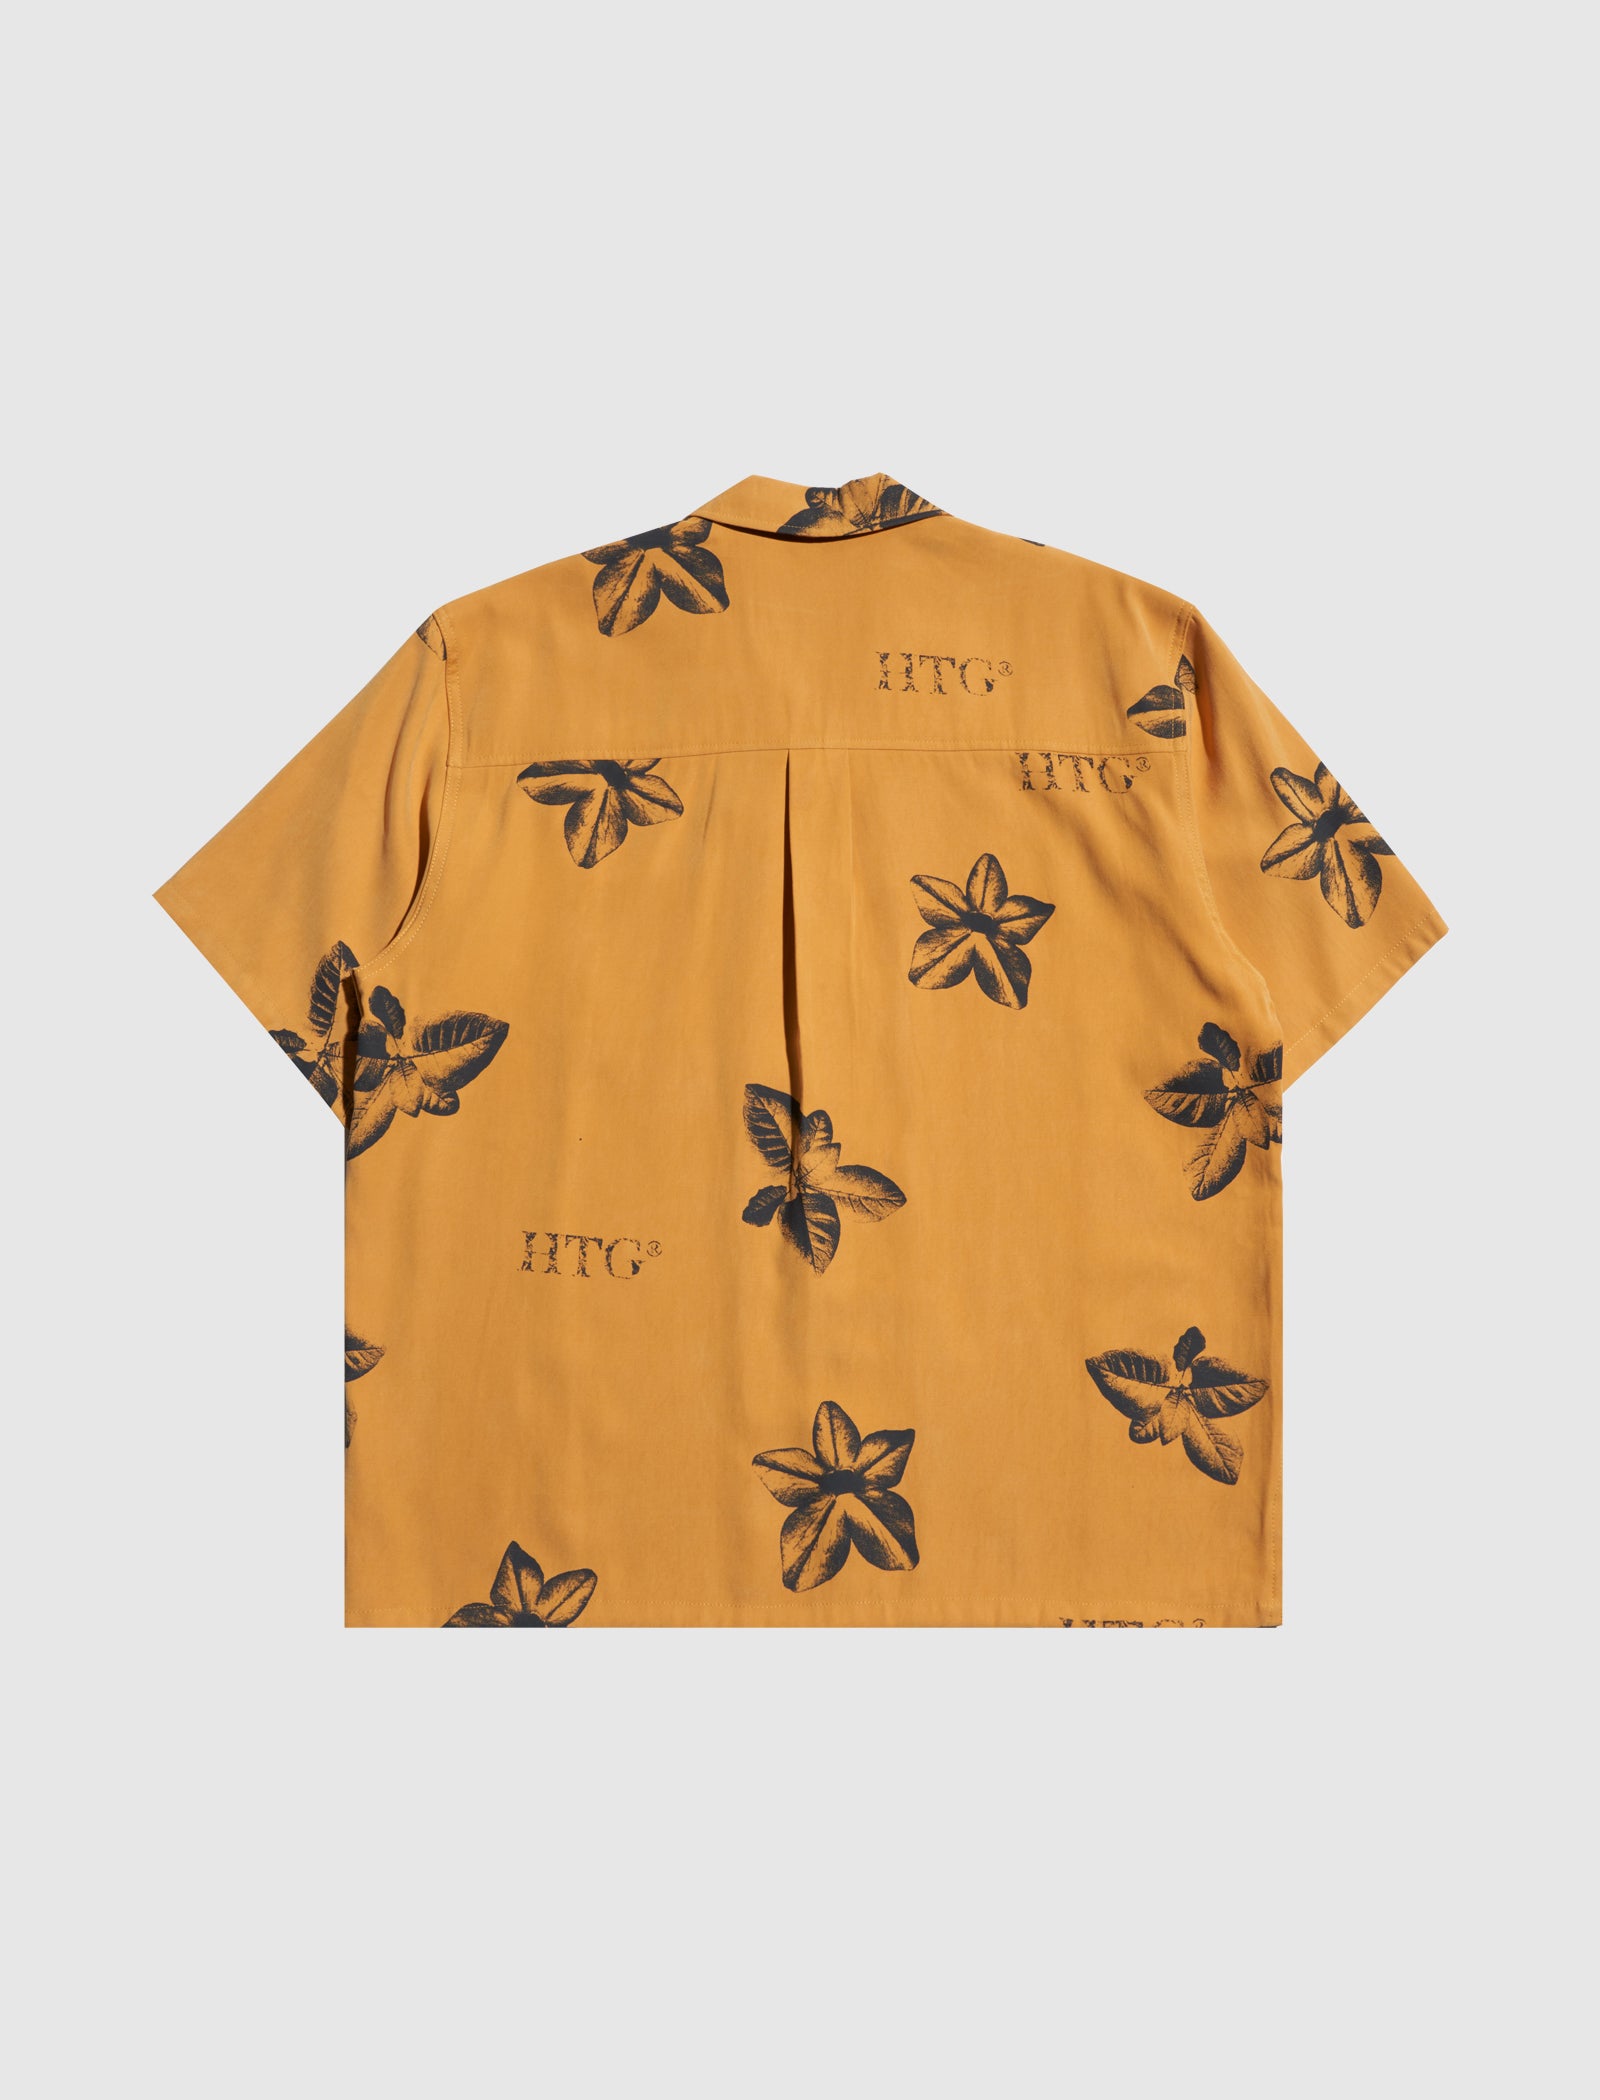 HONOR THE GIFT TOBACCO BUTTON-UP SHIRT